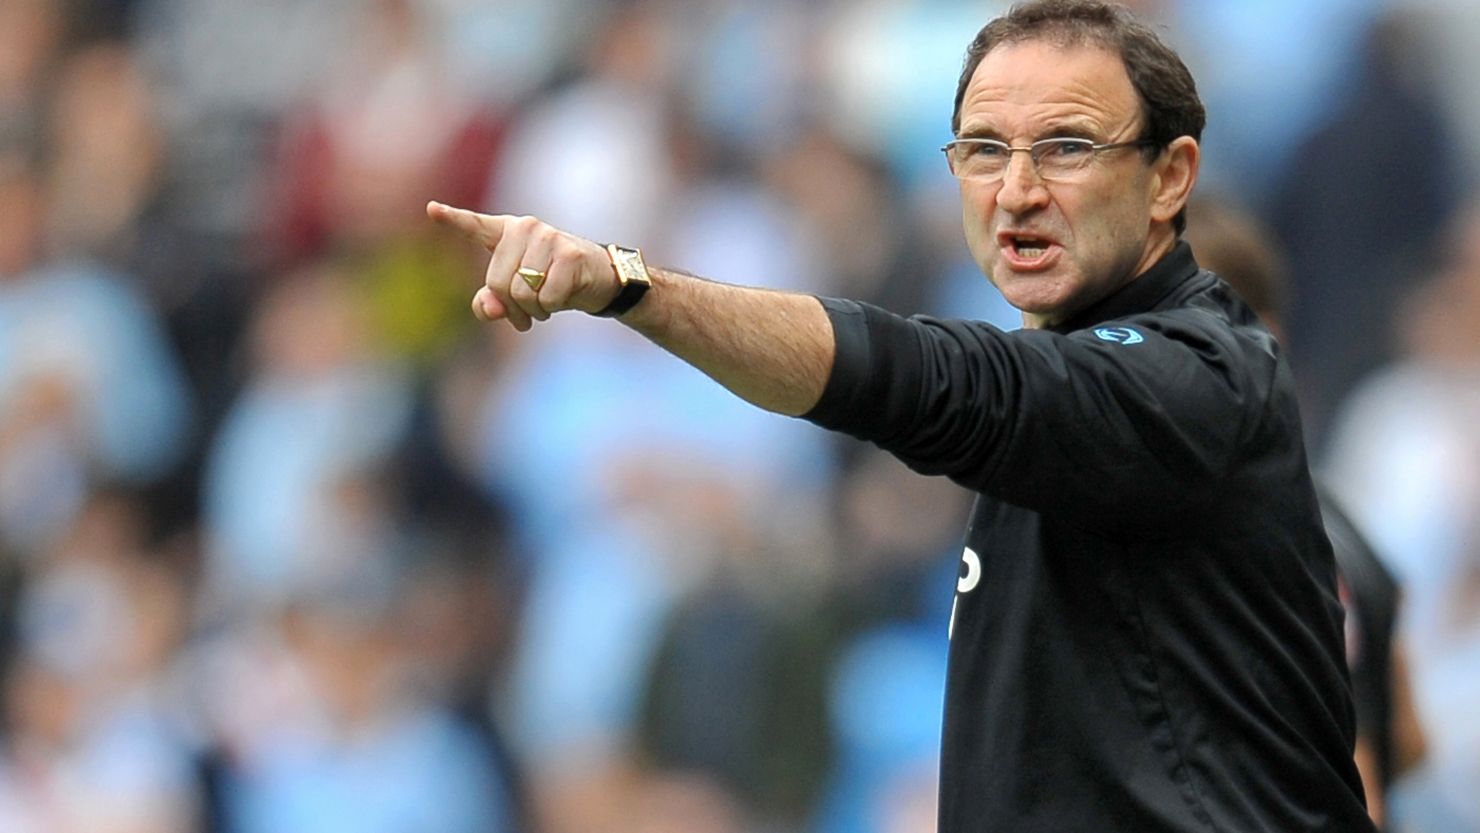 Martin O'Neill has been confirmed as the new manager of English Premier League team Sunderland 